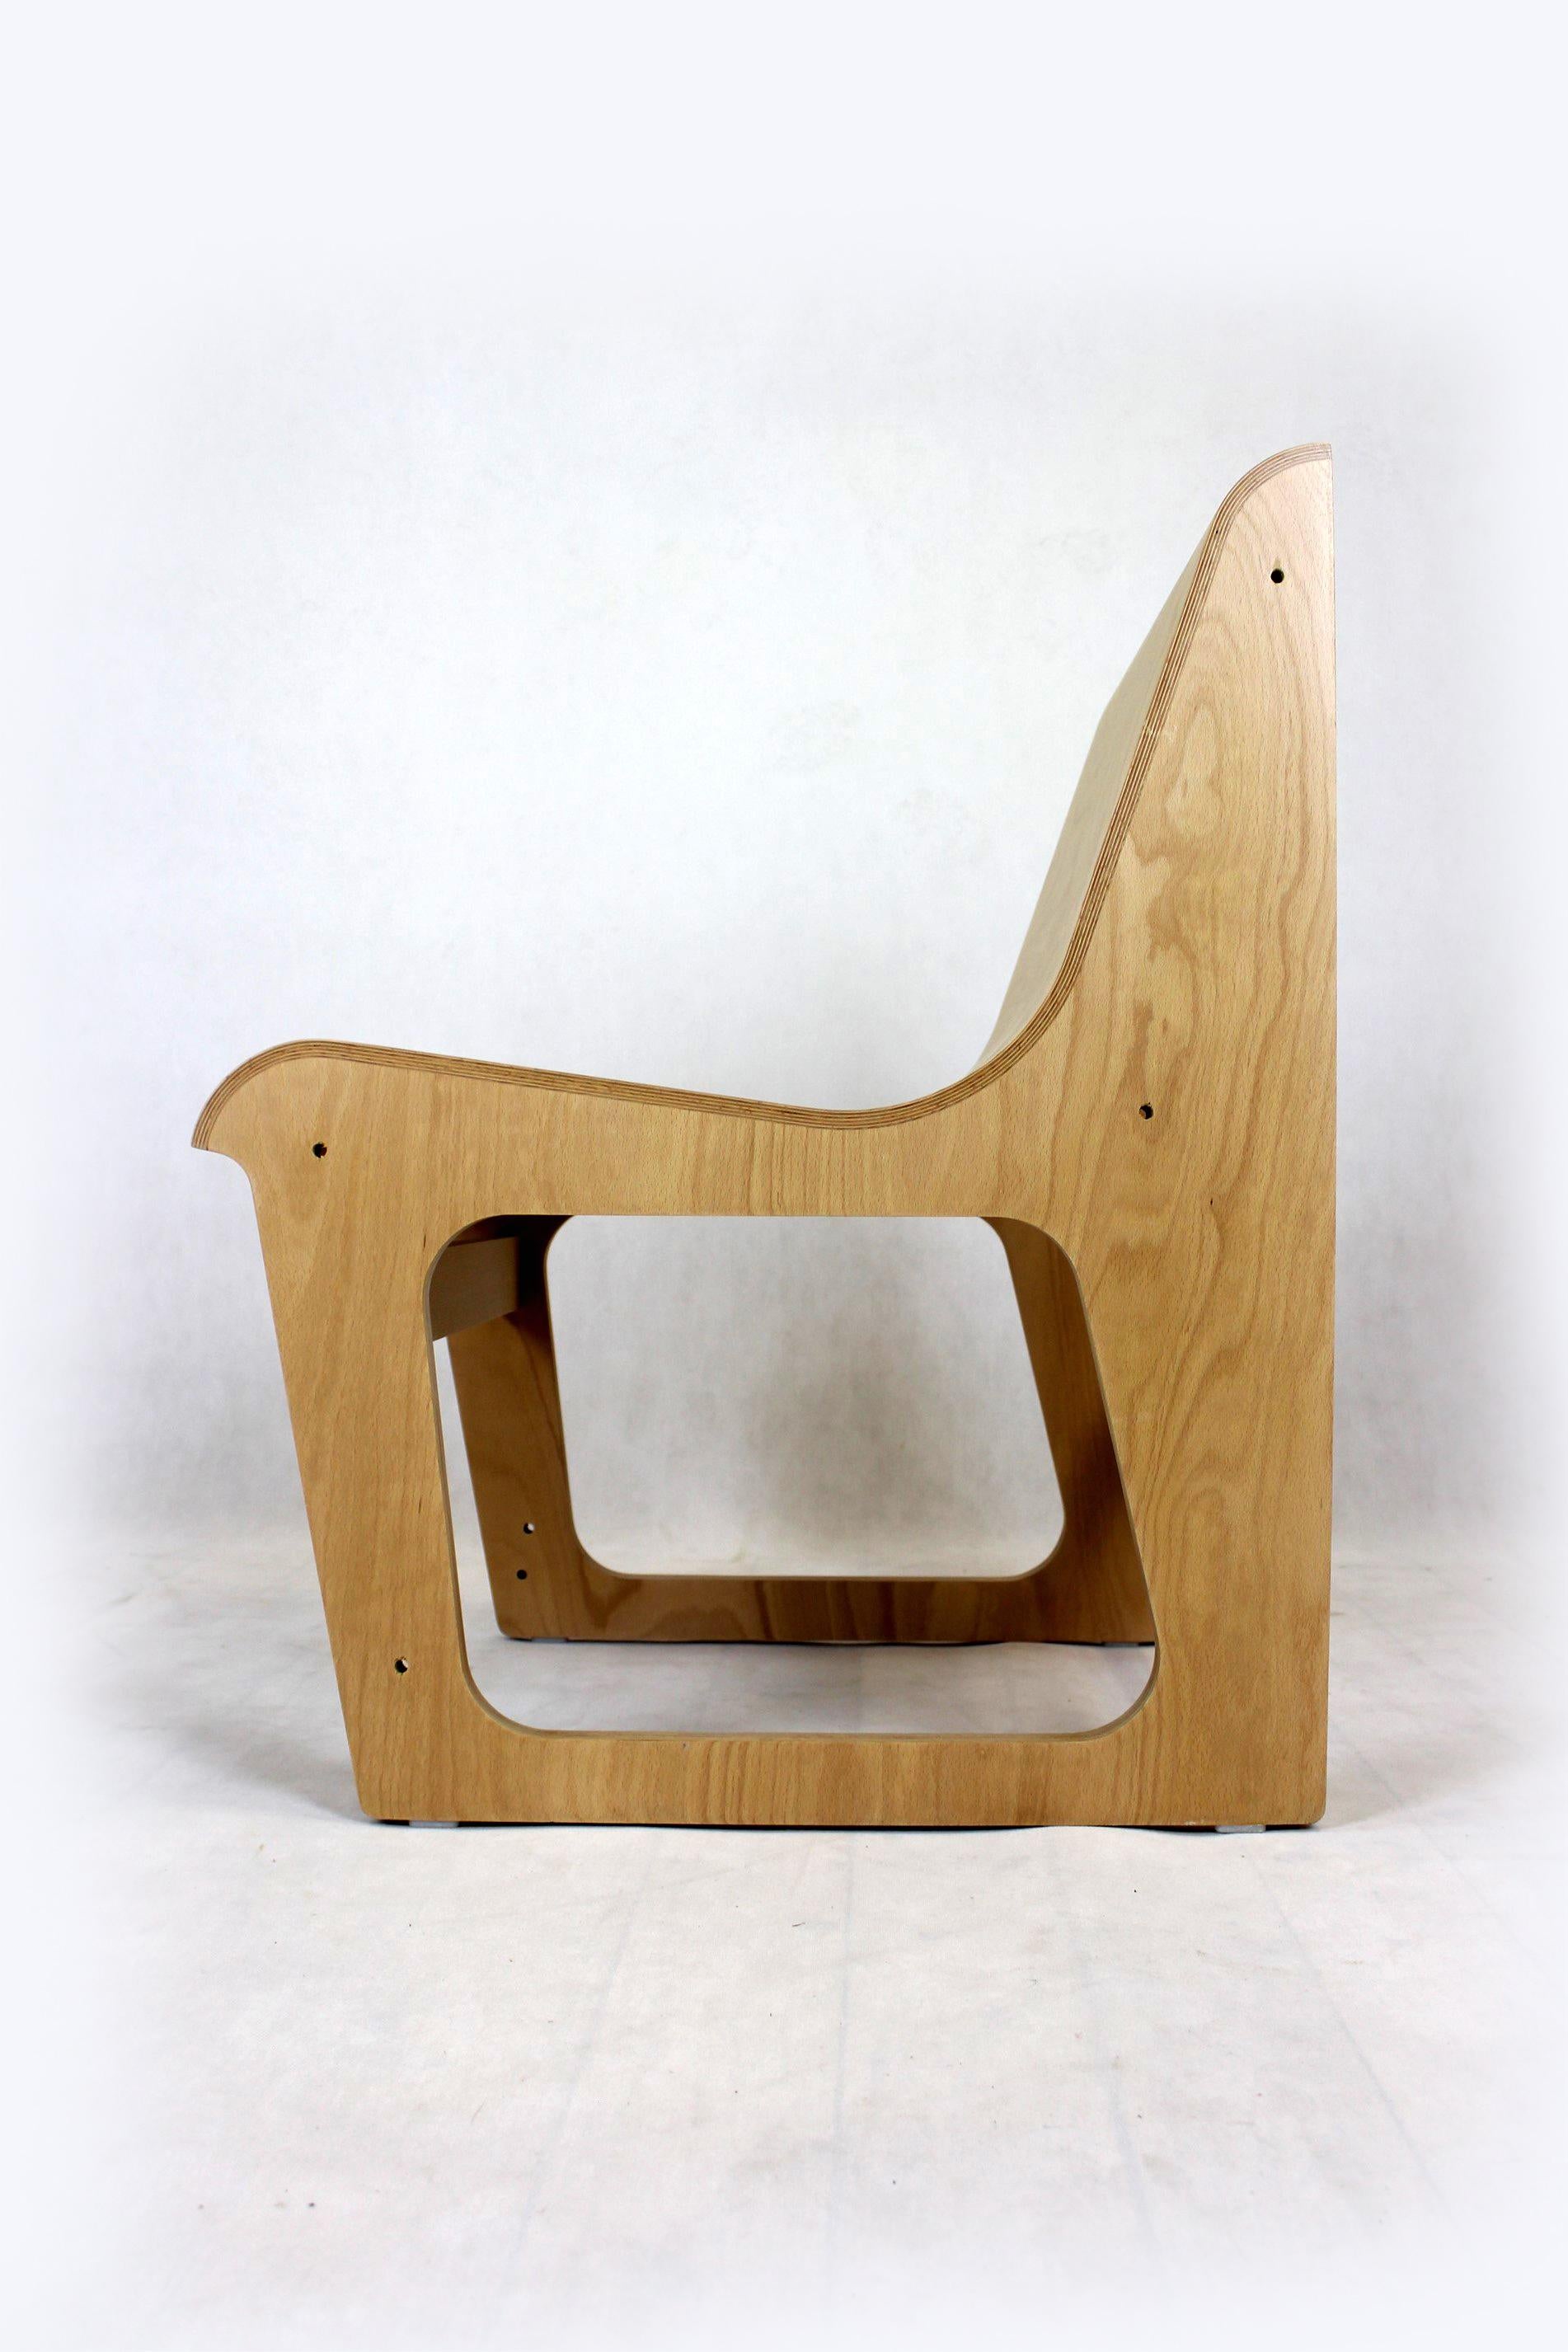 Beech Plywood Symposio Bench / Chairs by René Šulc for Ton, 2010s 13